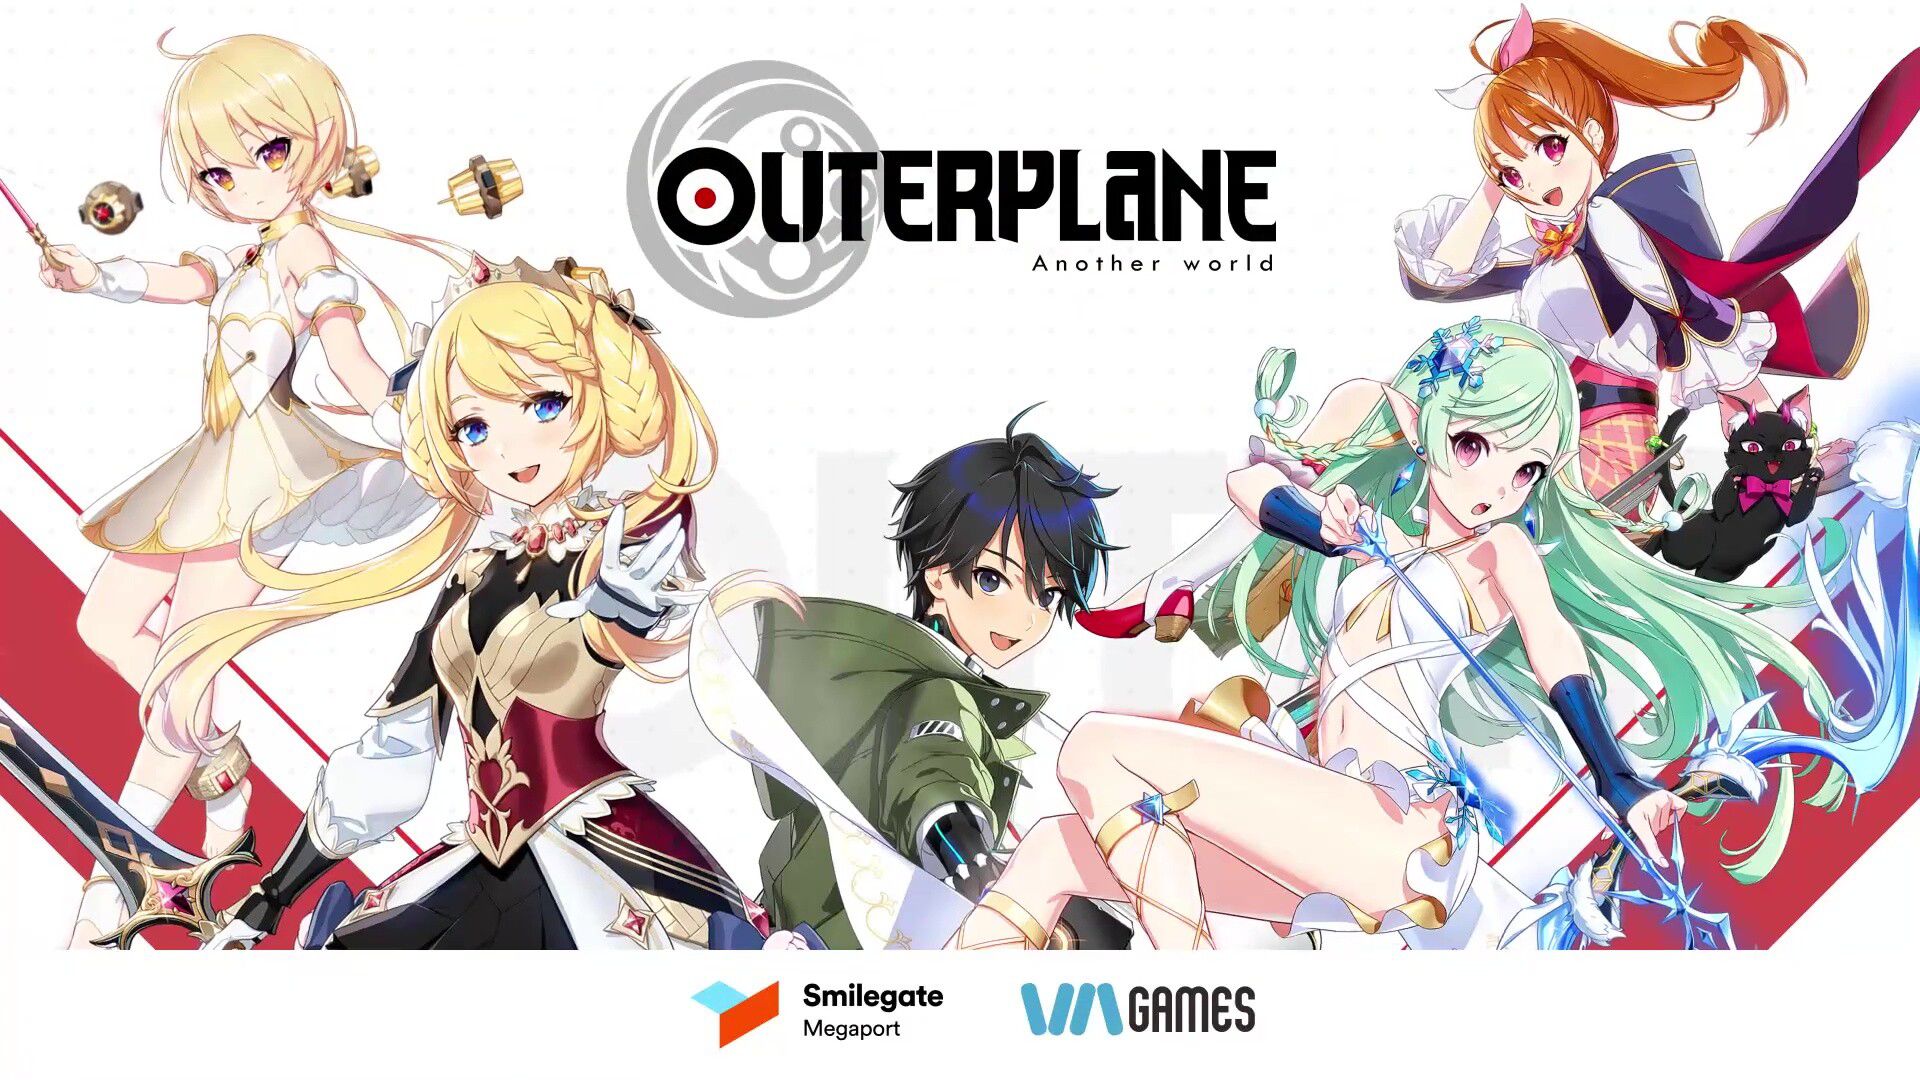 Smartphone game [OUTERPLANE] case game style 3D battle RPG, girls and panchiras in erotic costumes! 15